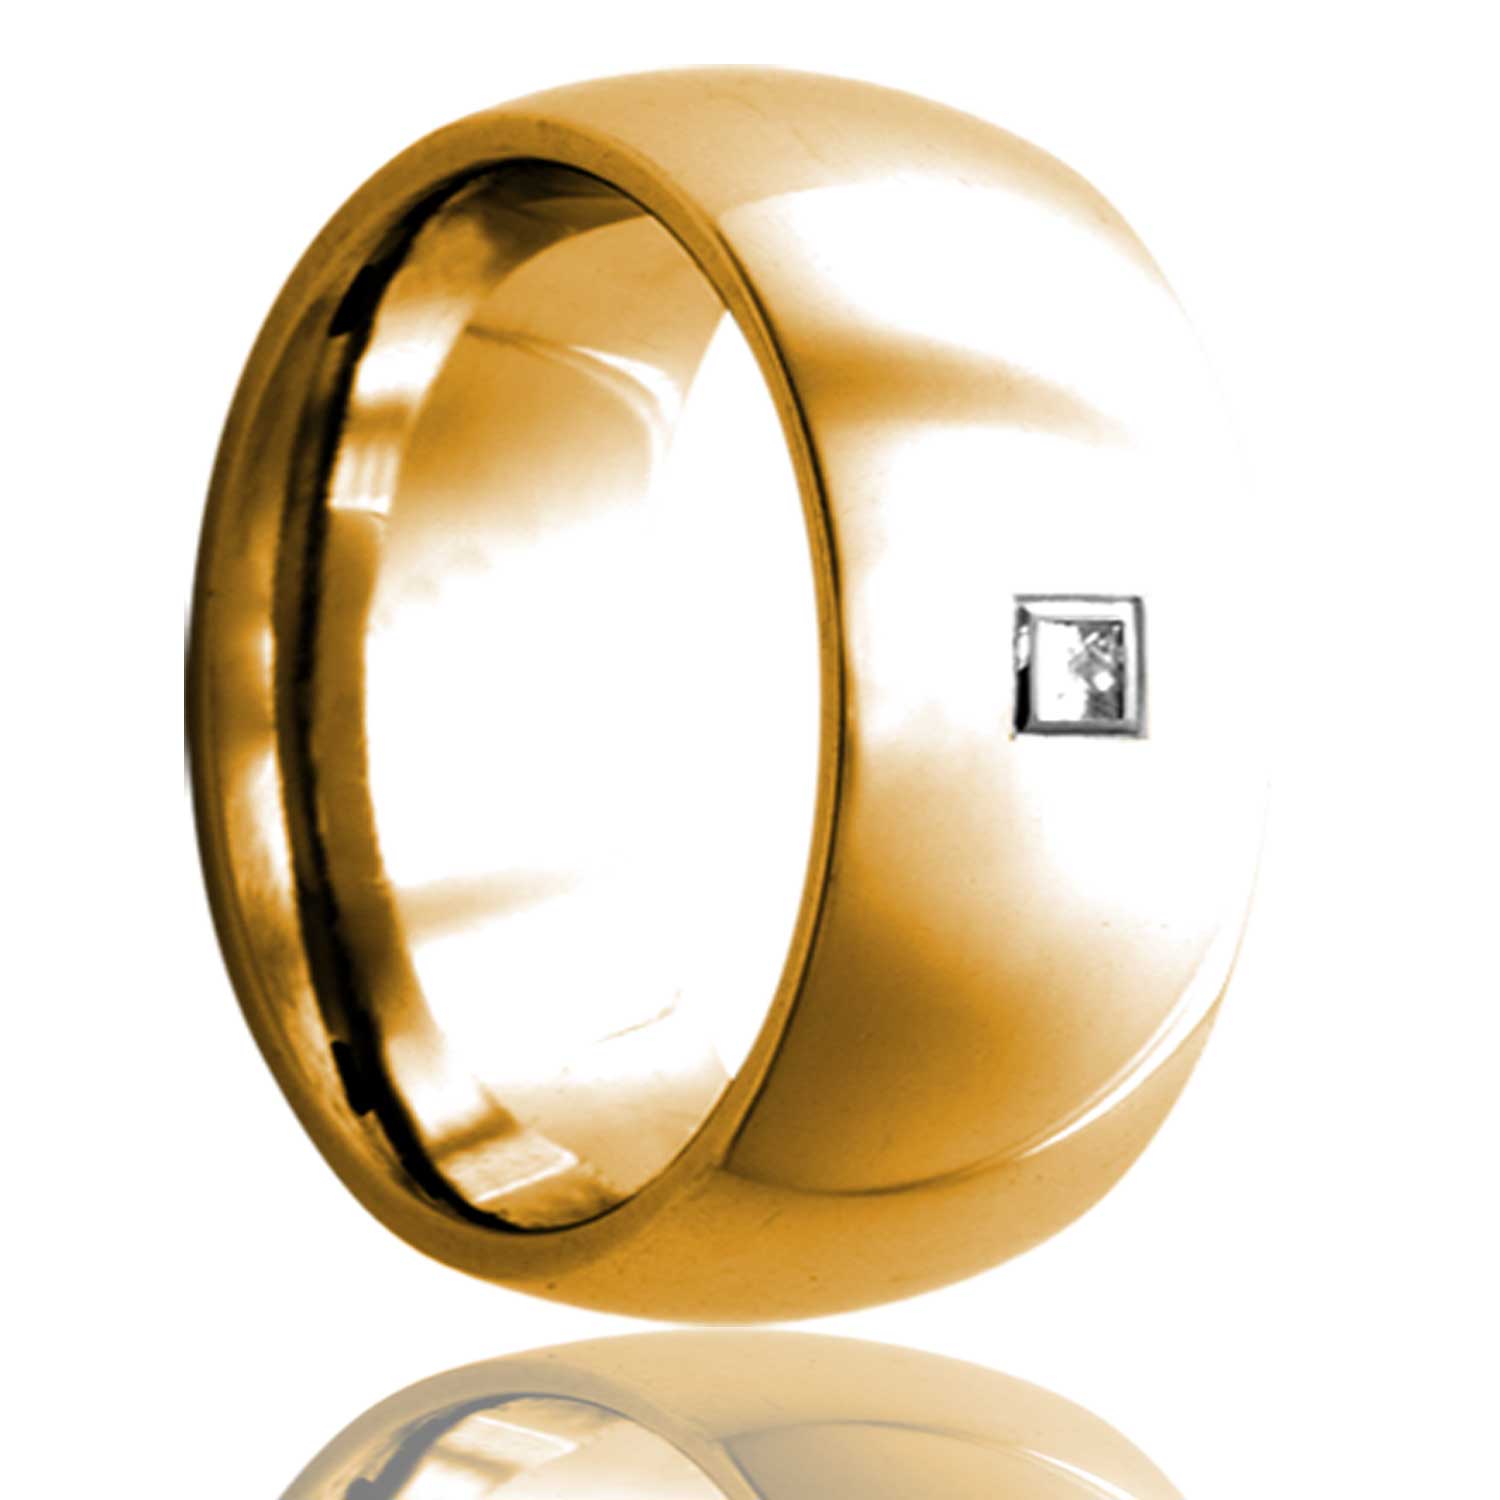 A domed 14k gold wedding band with square diamond displayed on a neutral white background.